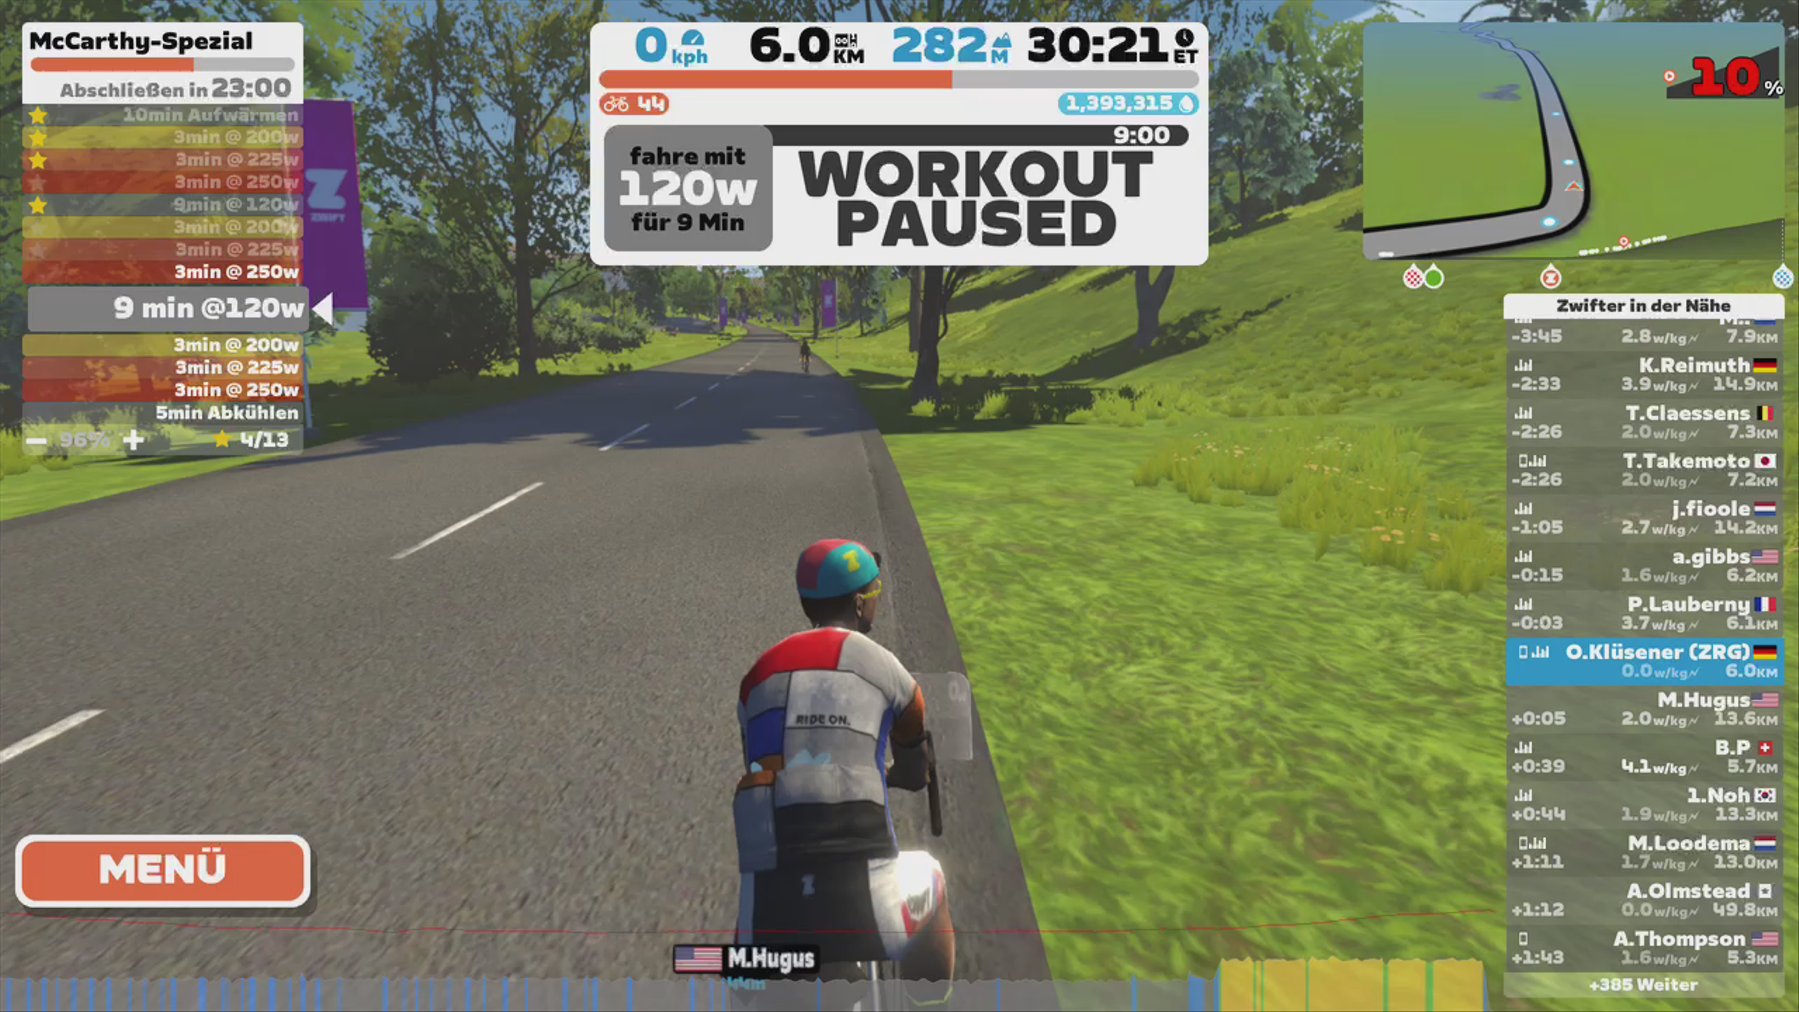 Zwift - The McCarthy Special in France